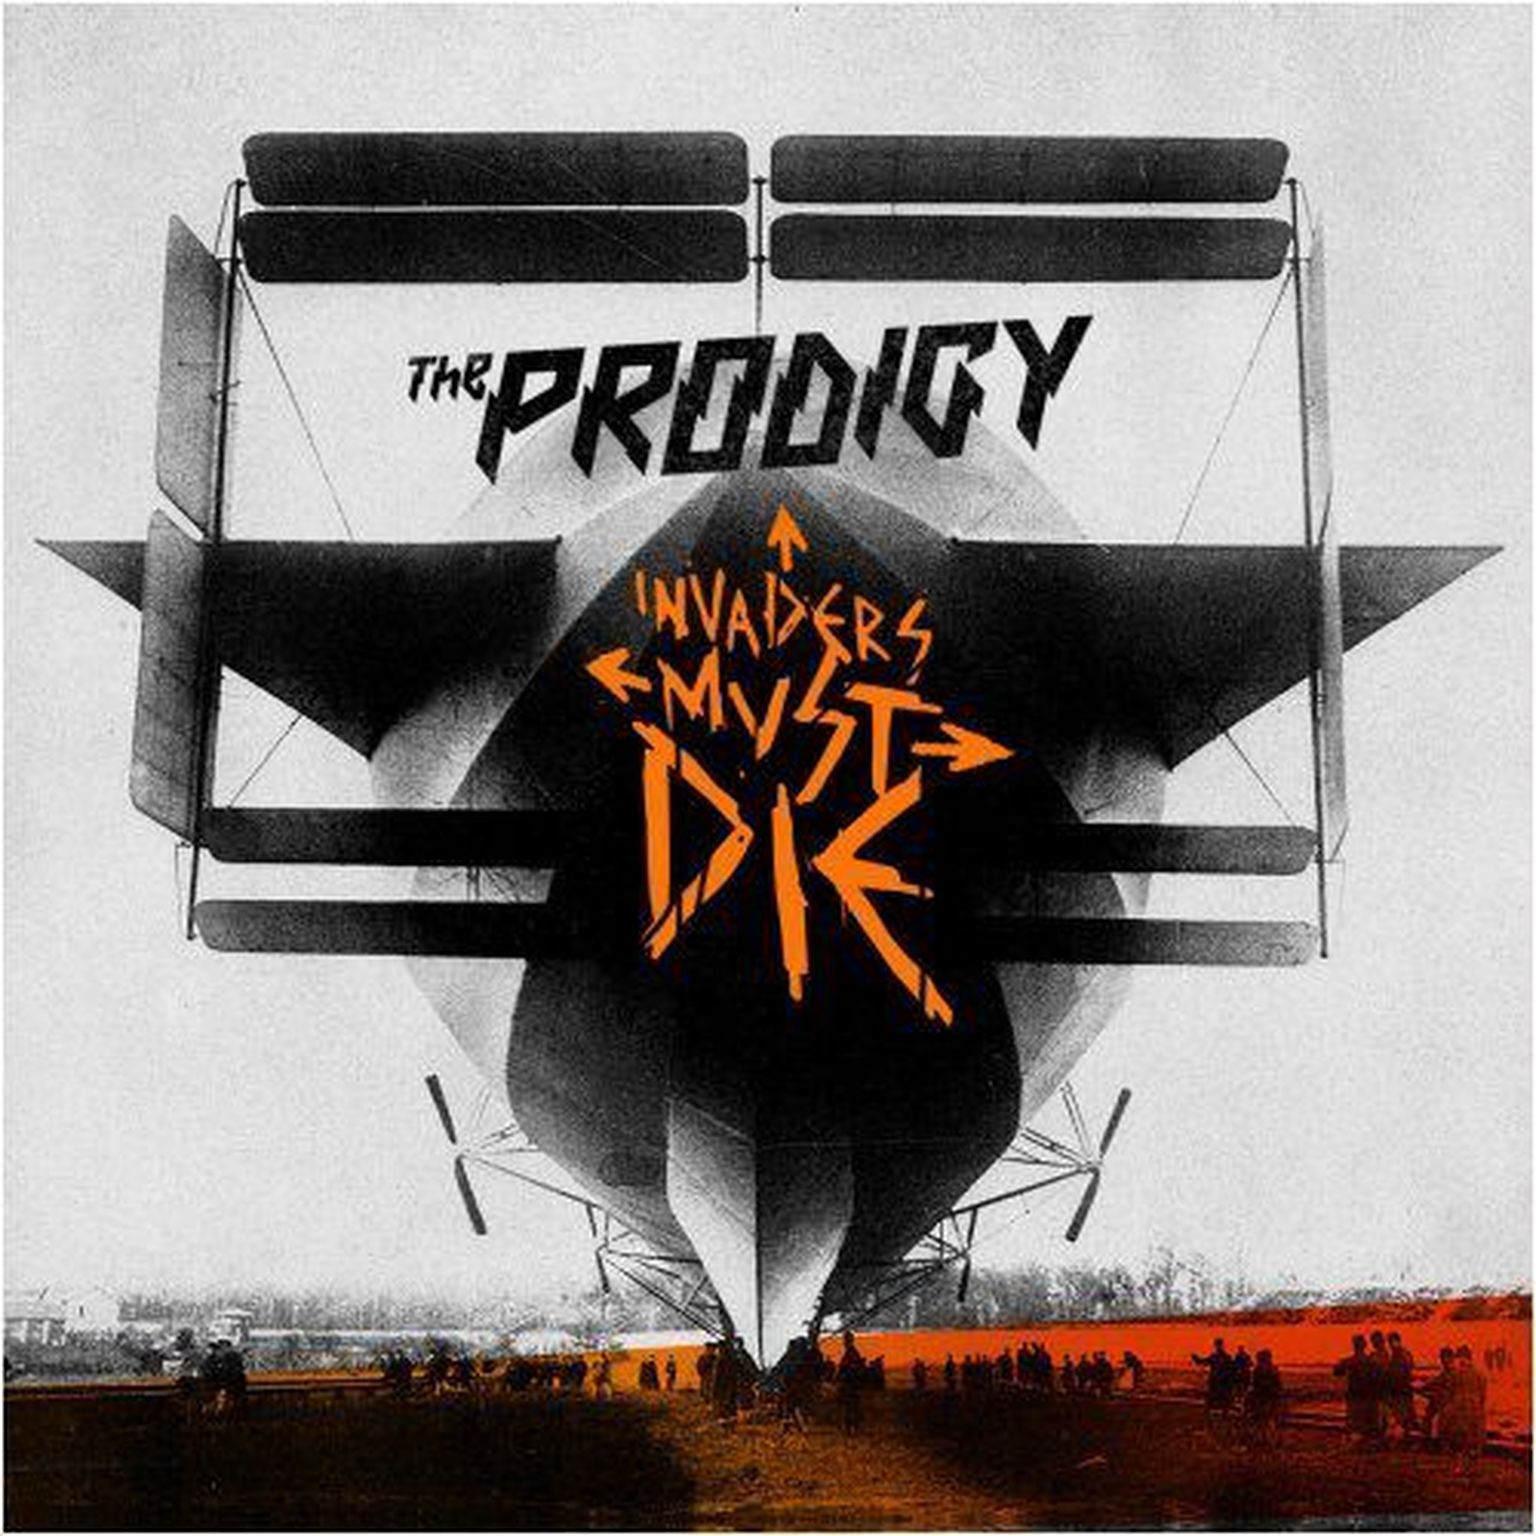 The Prodigy “Invaders Must Die”.